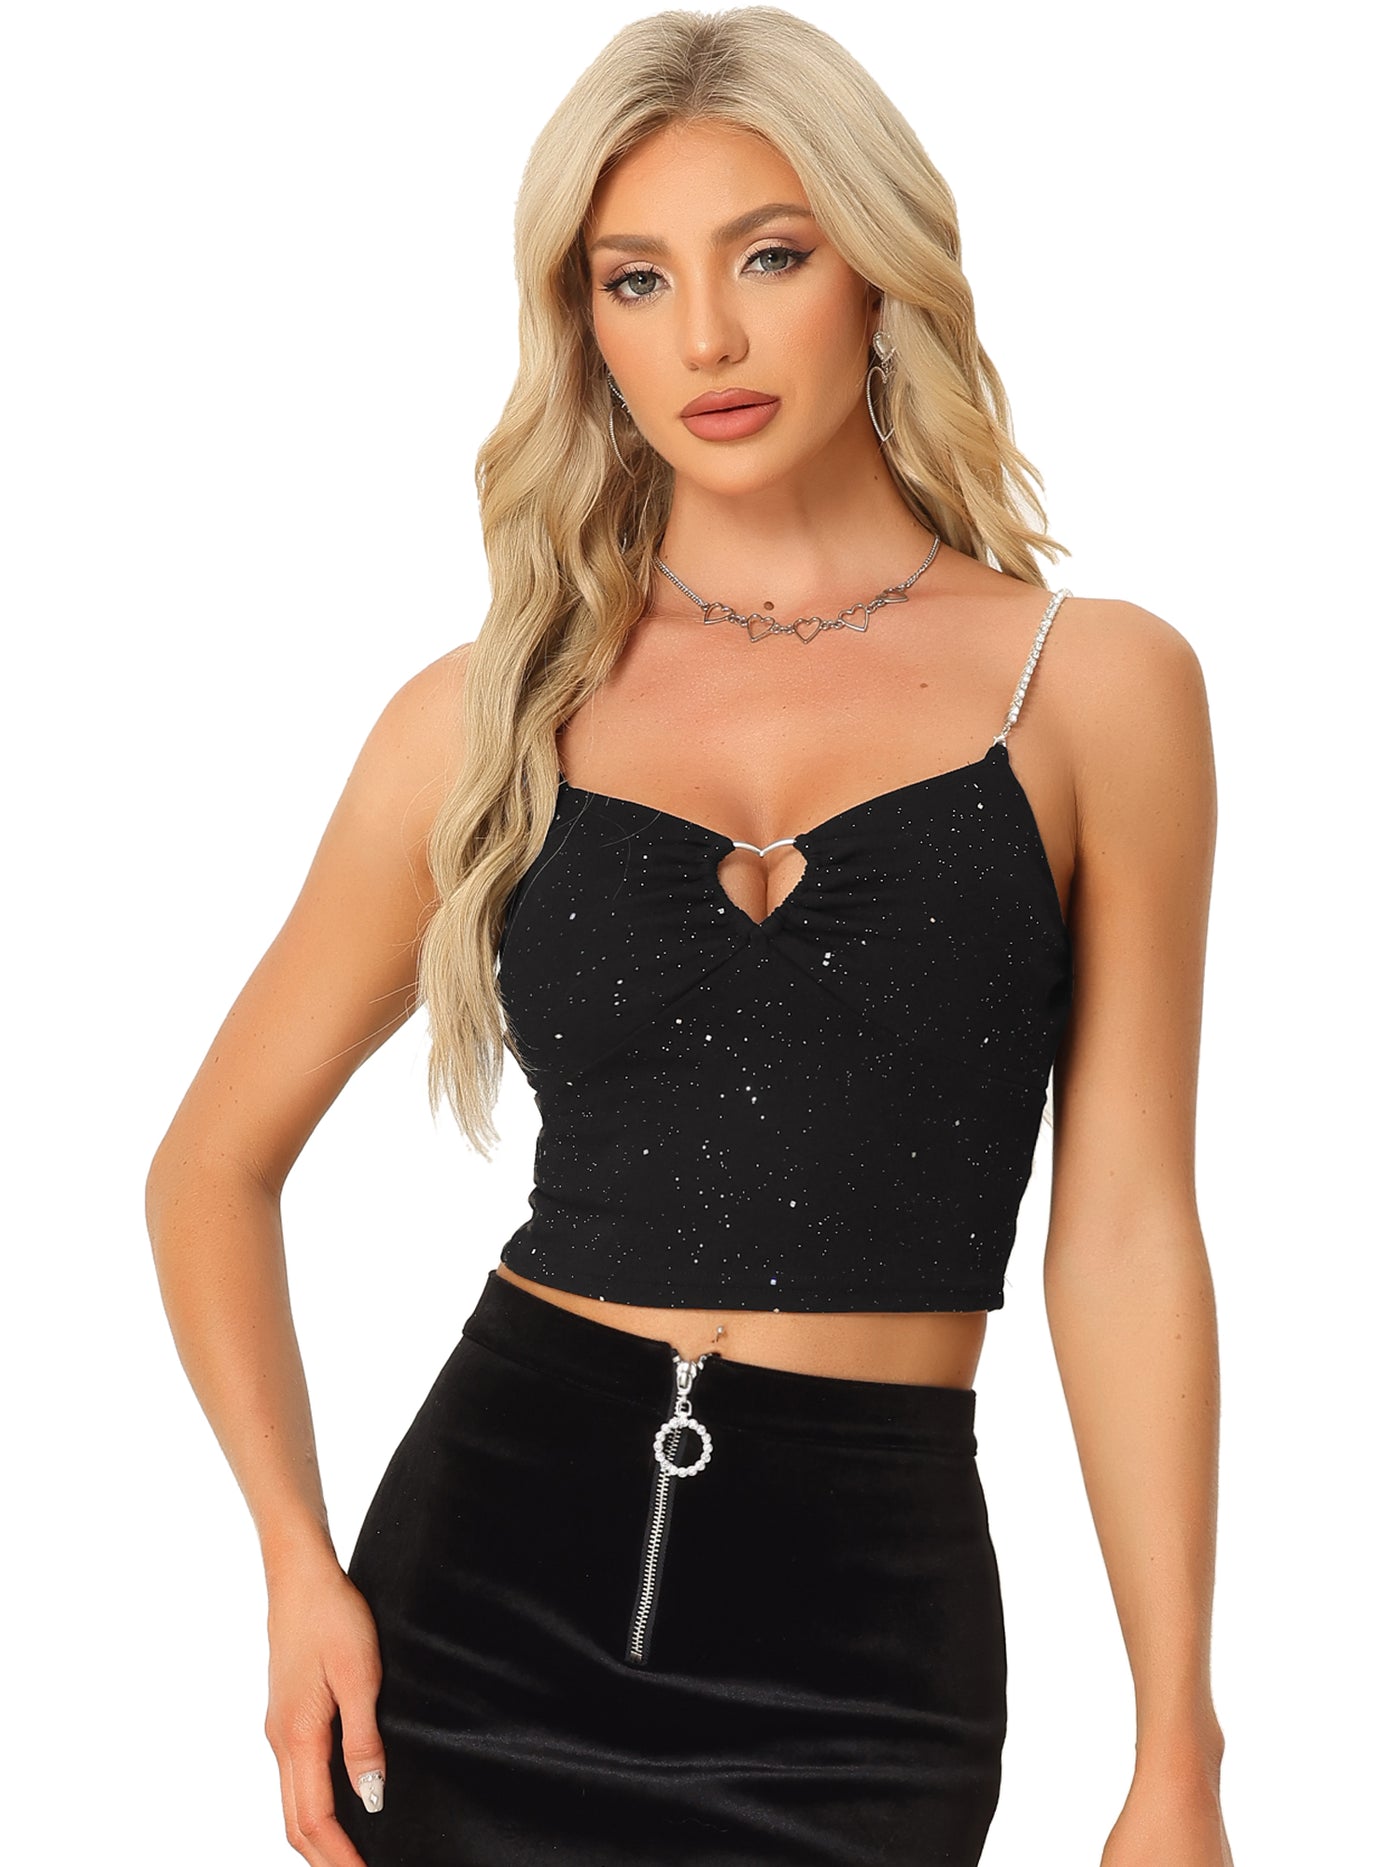 Allegra K Sparkly Glitter Encrusted Spaghetti Straps Cut Out Party Camisole Cropped Tops